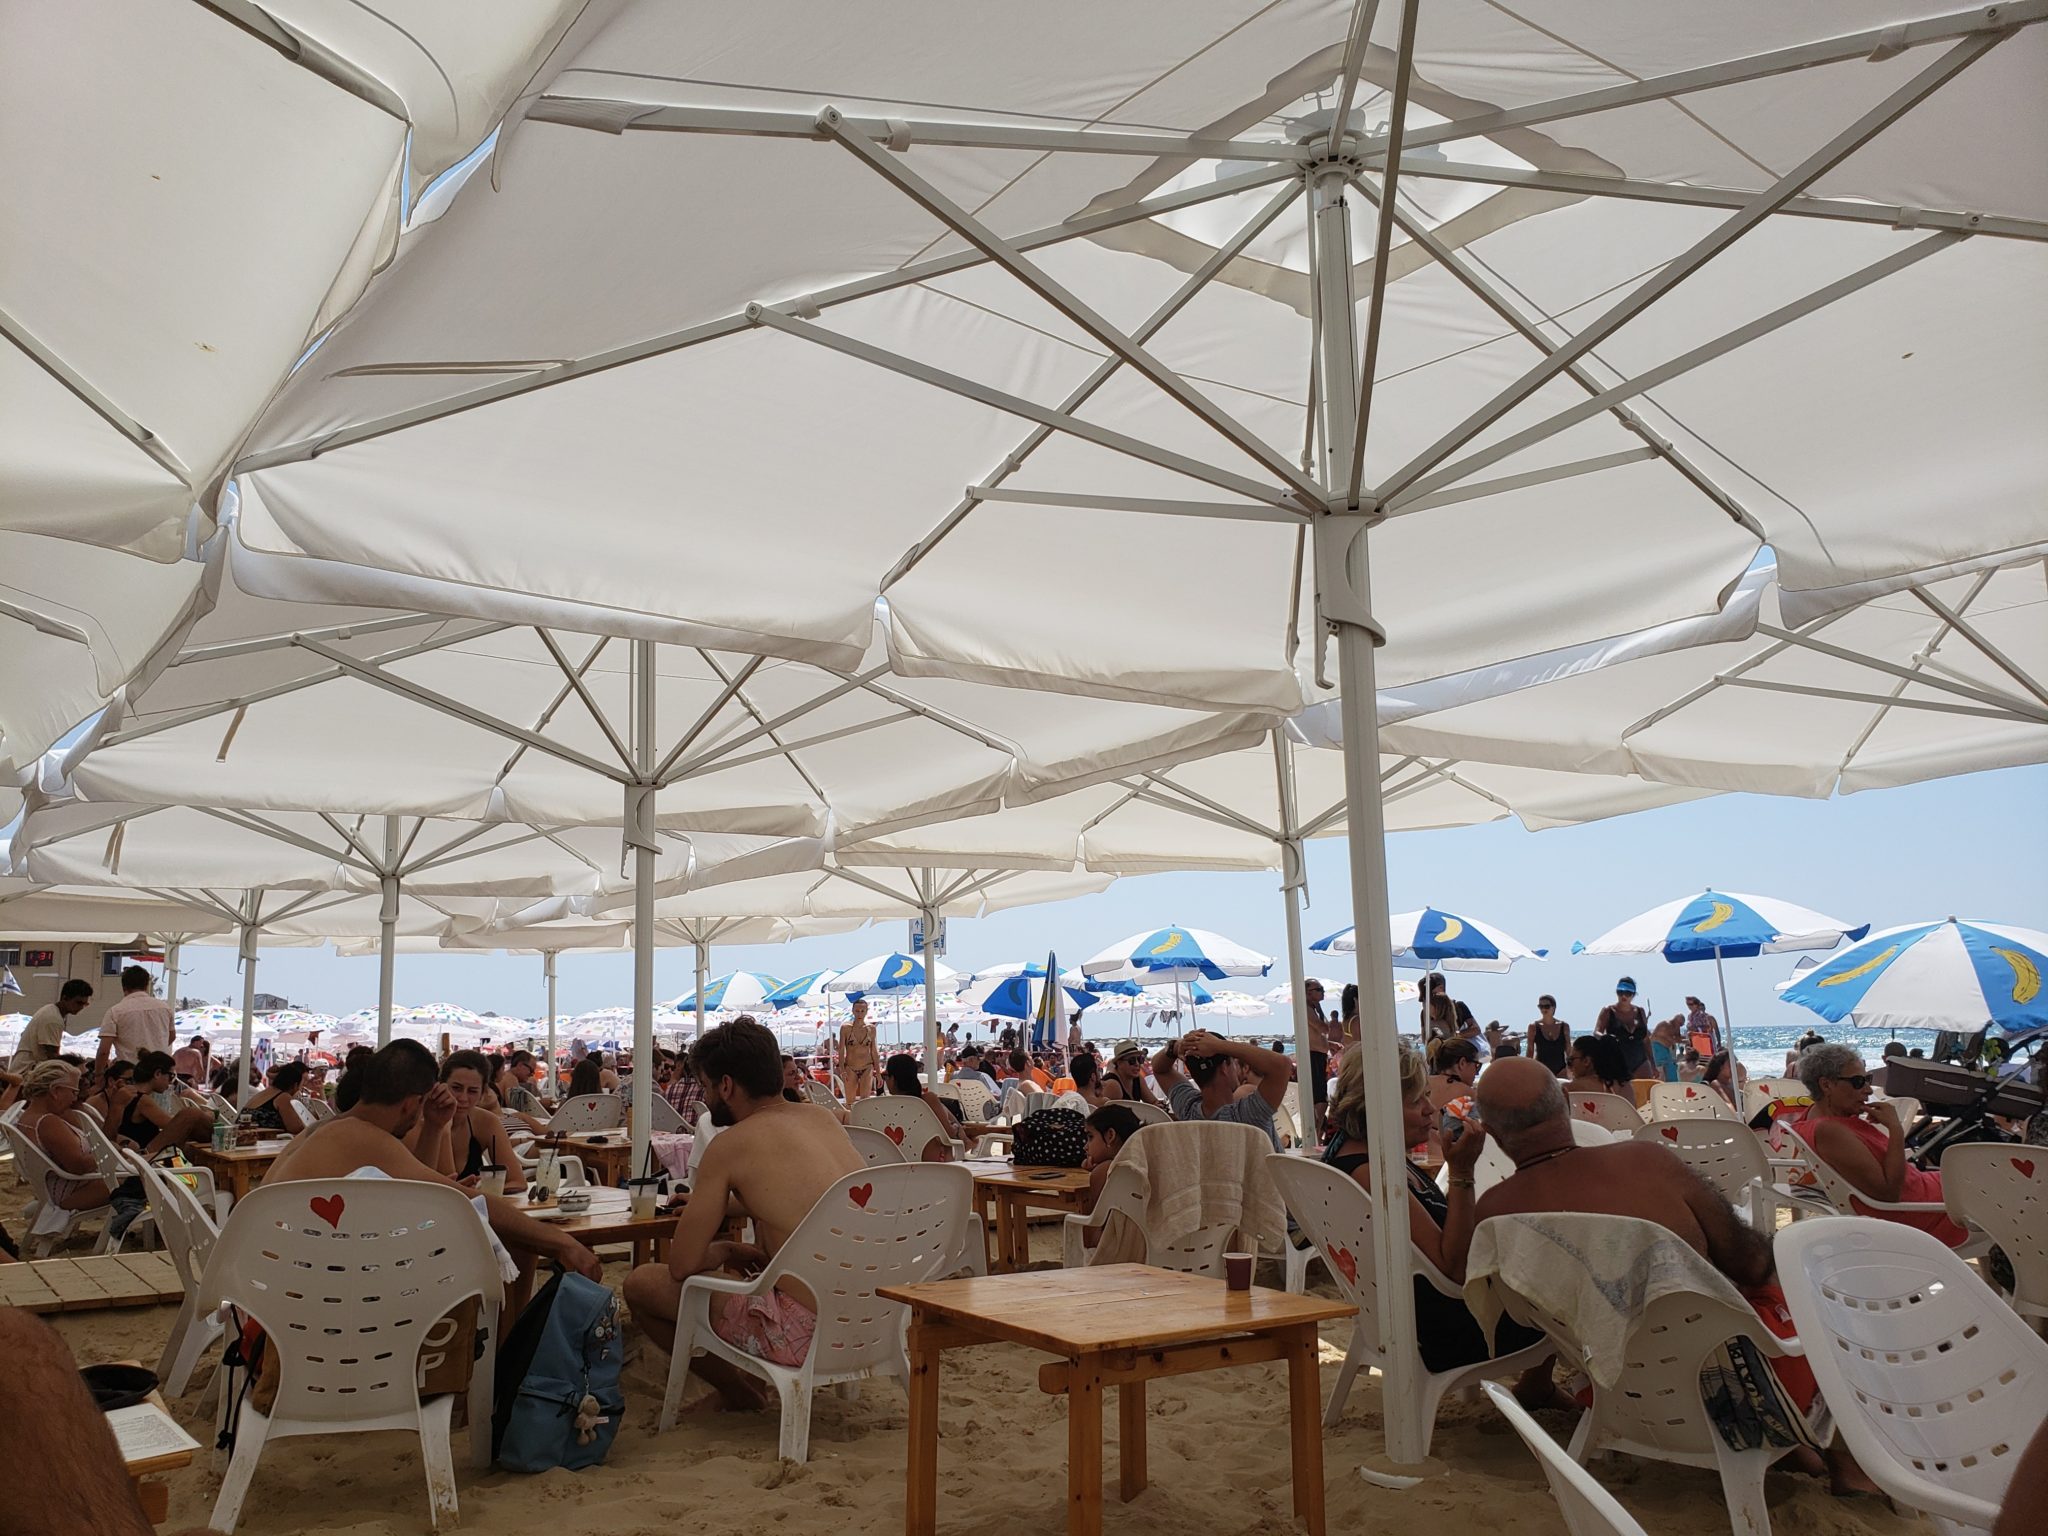 a group of people sitting at tables and chairs under a large white umbrella